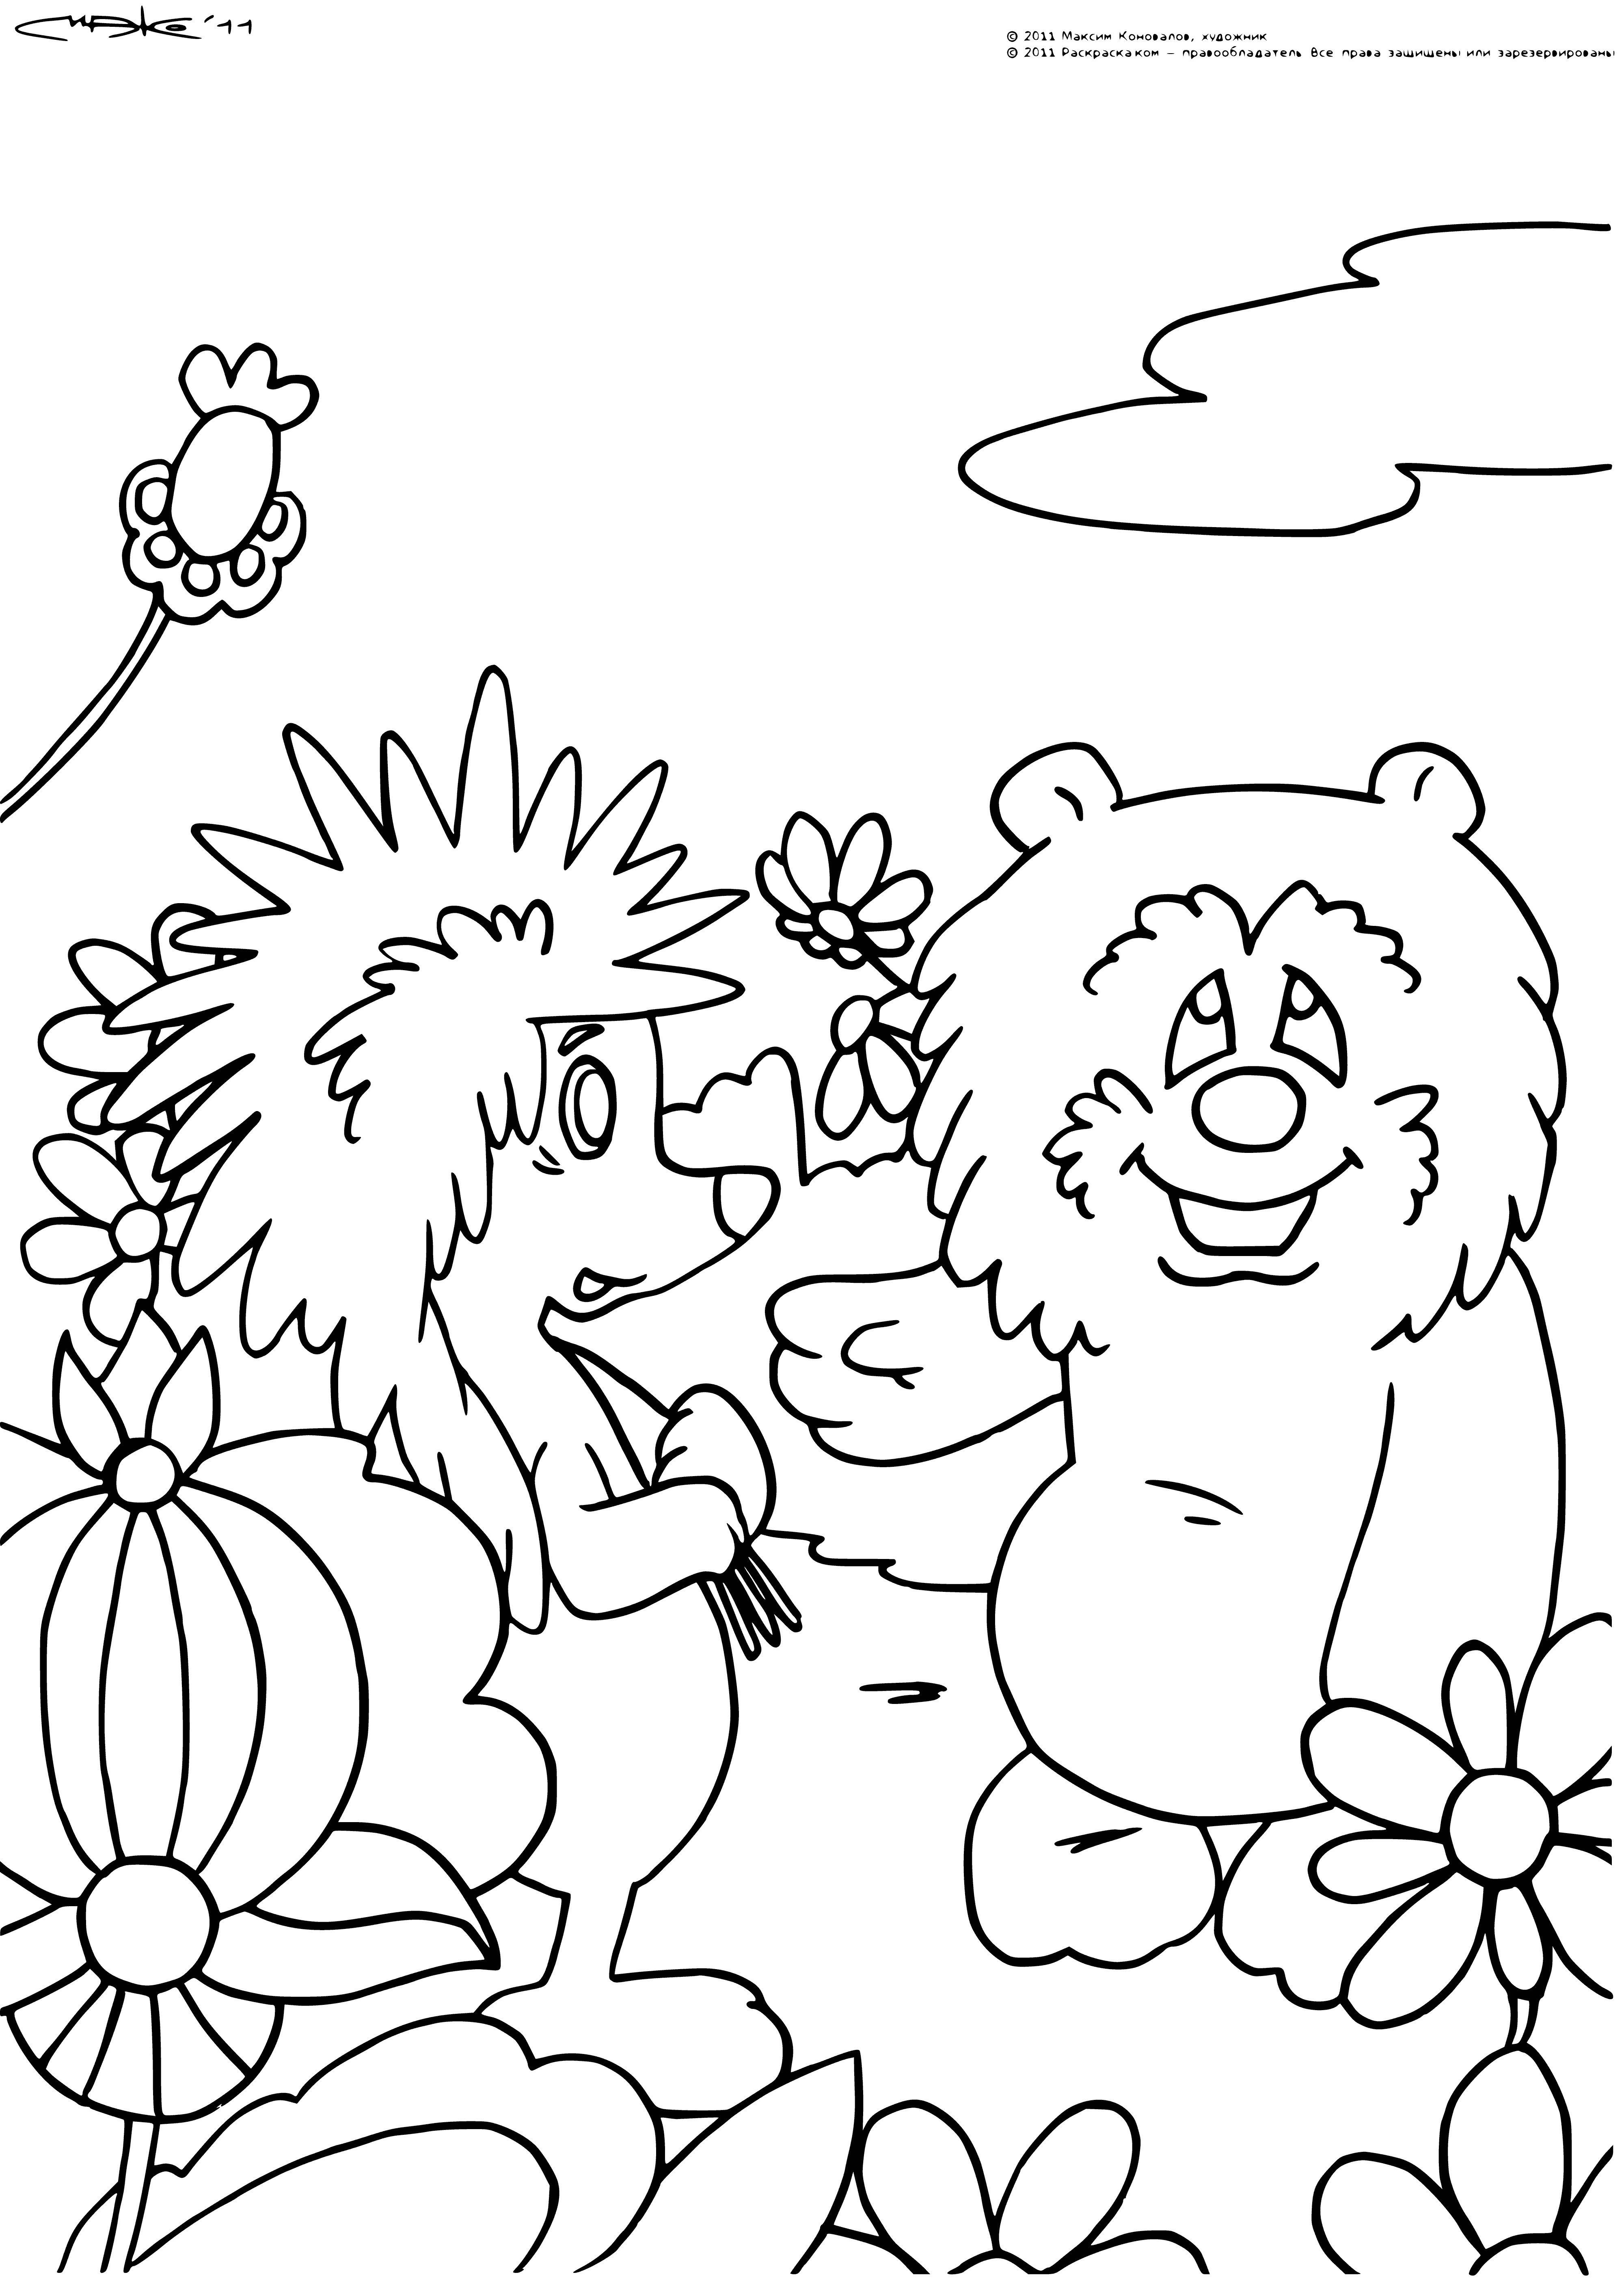 coloring page: Hedgehog stands, teddy bear sits with arms outstretched, leaning in for a hug! #hedgehug